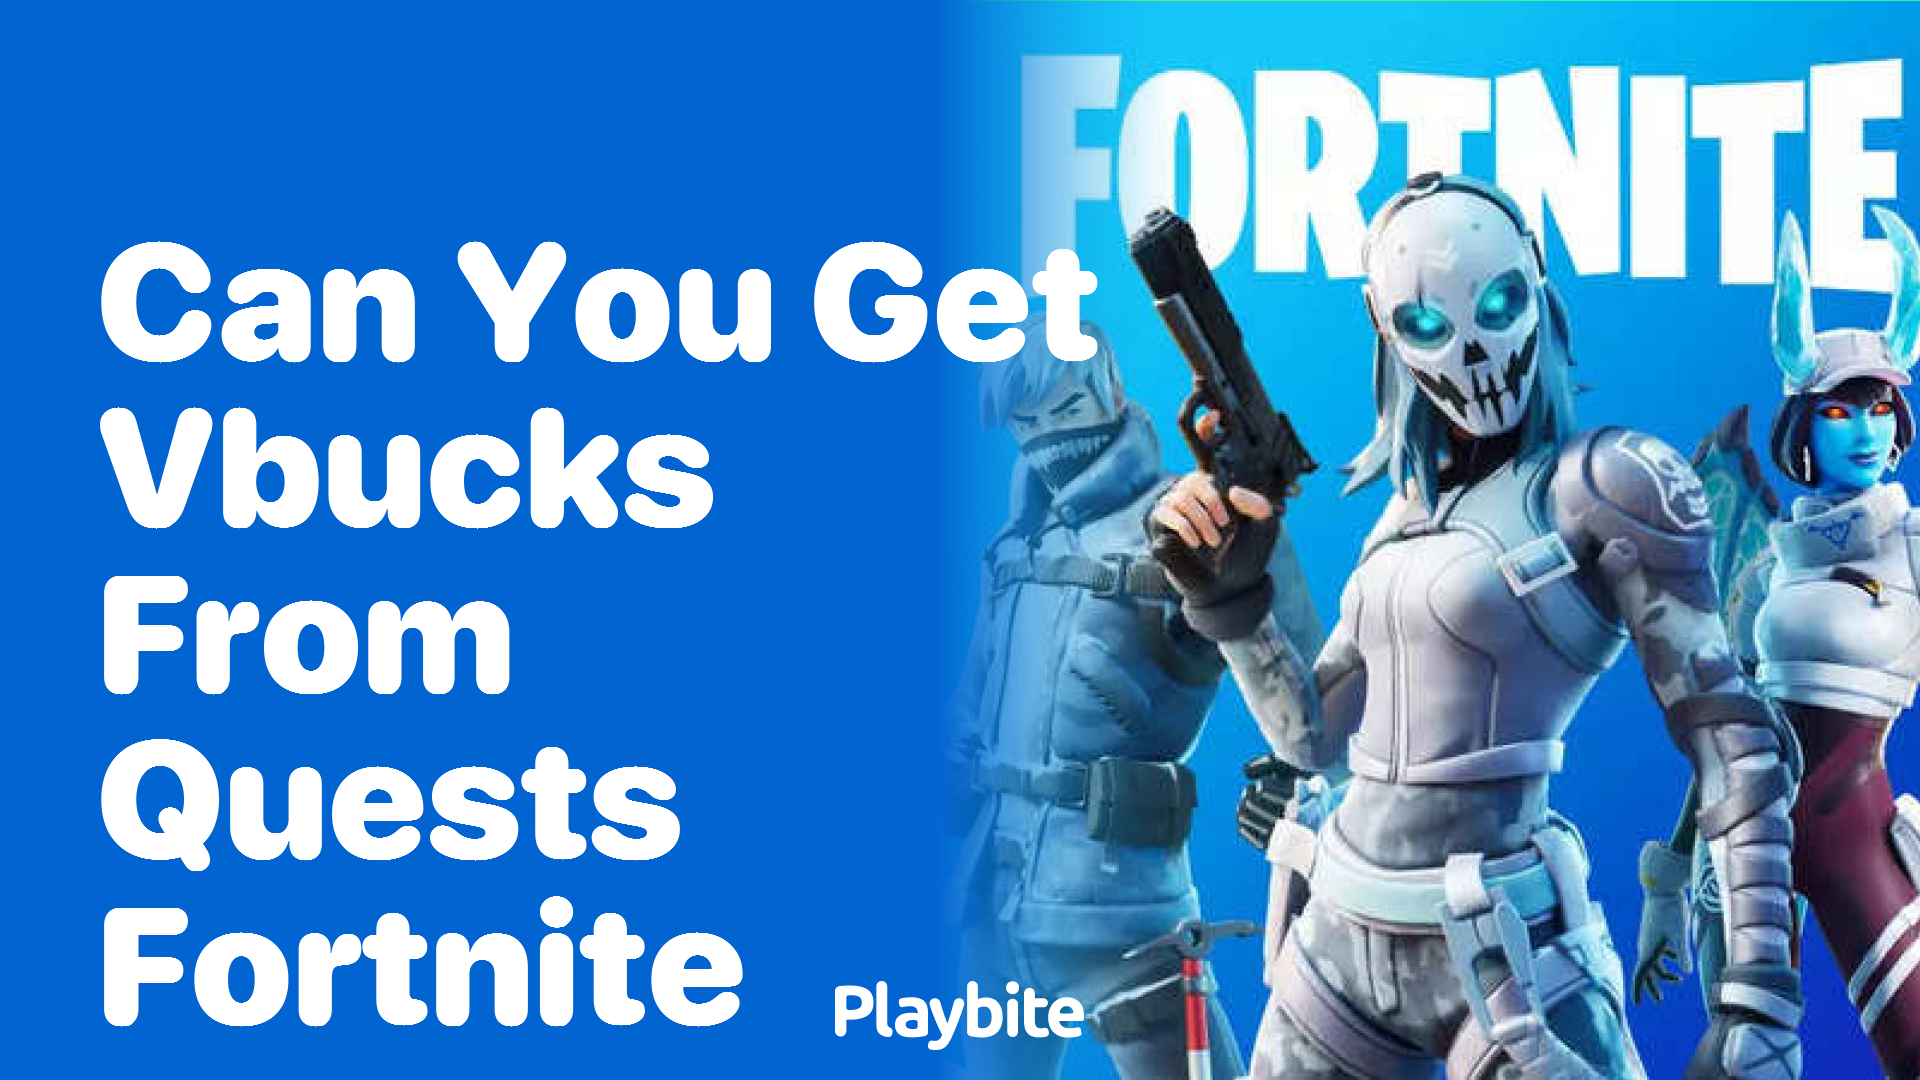 Can You Get V-Bucks from Quests in Fortnite?